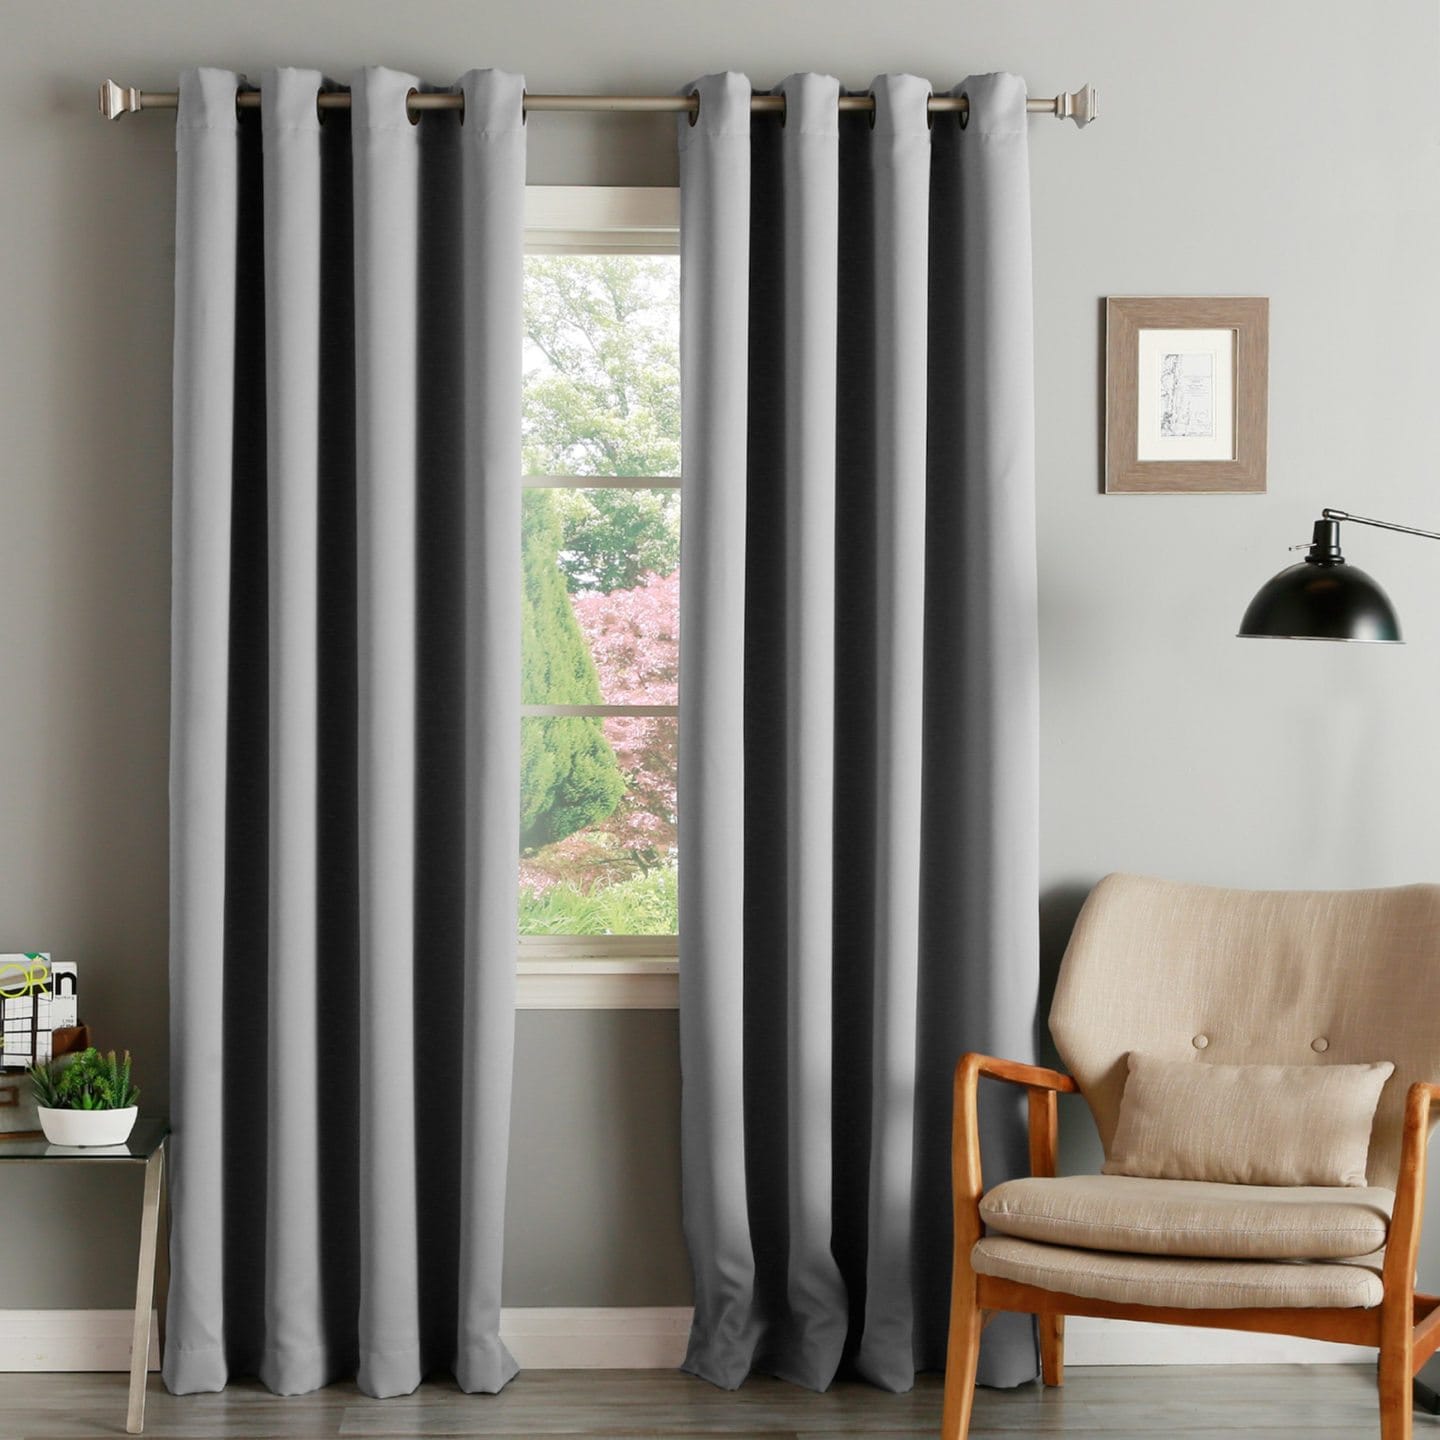 Details about   Spider-Man Thicken Blackout Curtains Solid Thermal Window Drapes Panels 1 Pair 